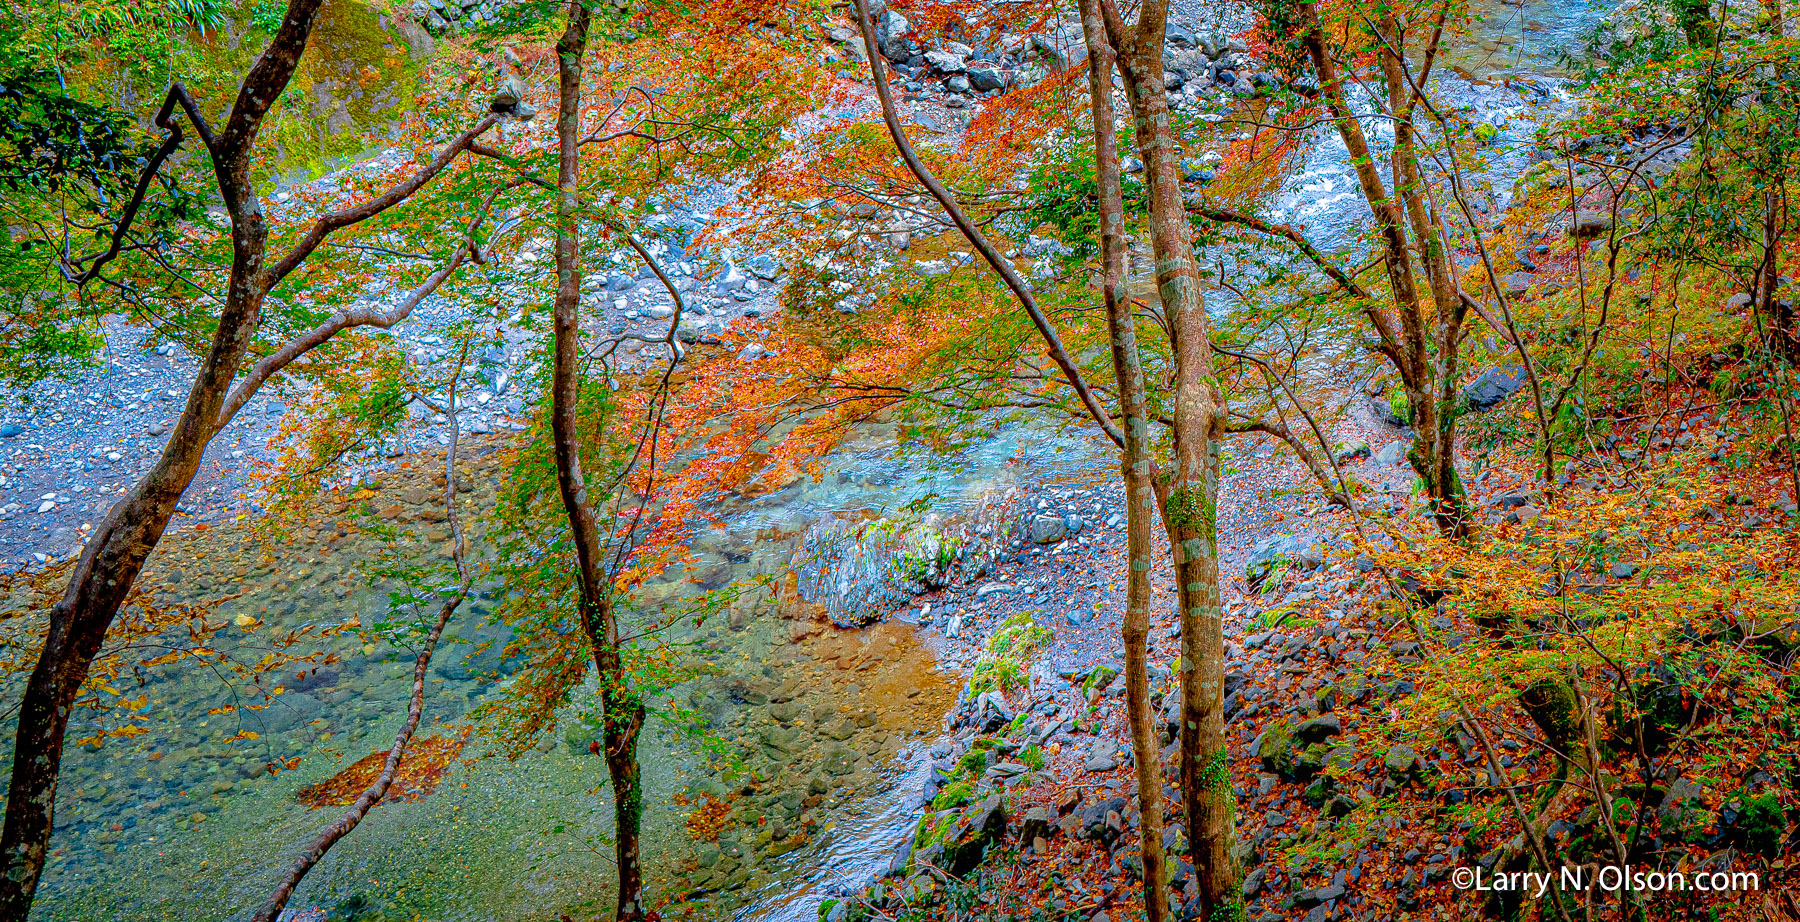 Autum Forest, Kyoto, Japan | Low water in the creek bed creates an abstract image.